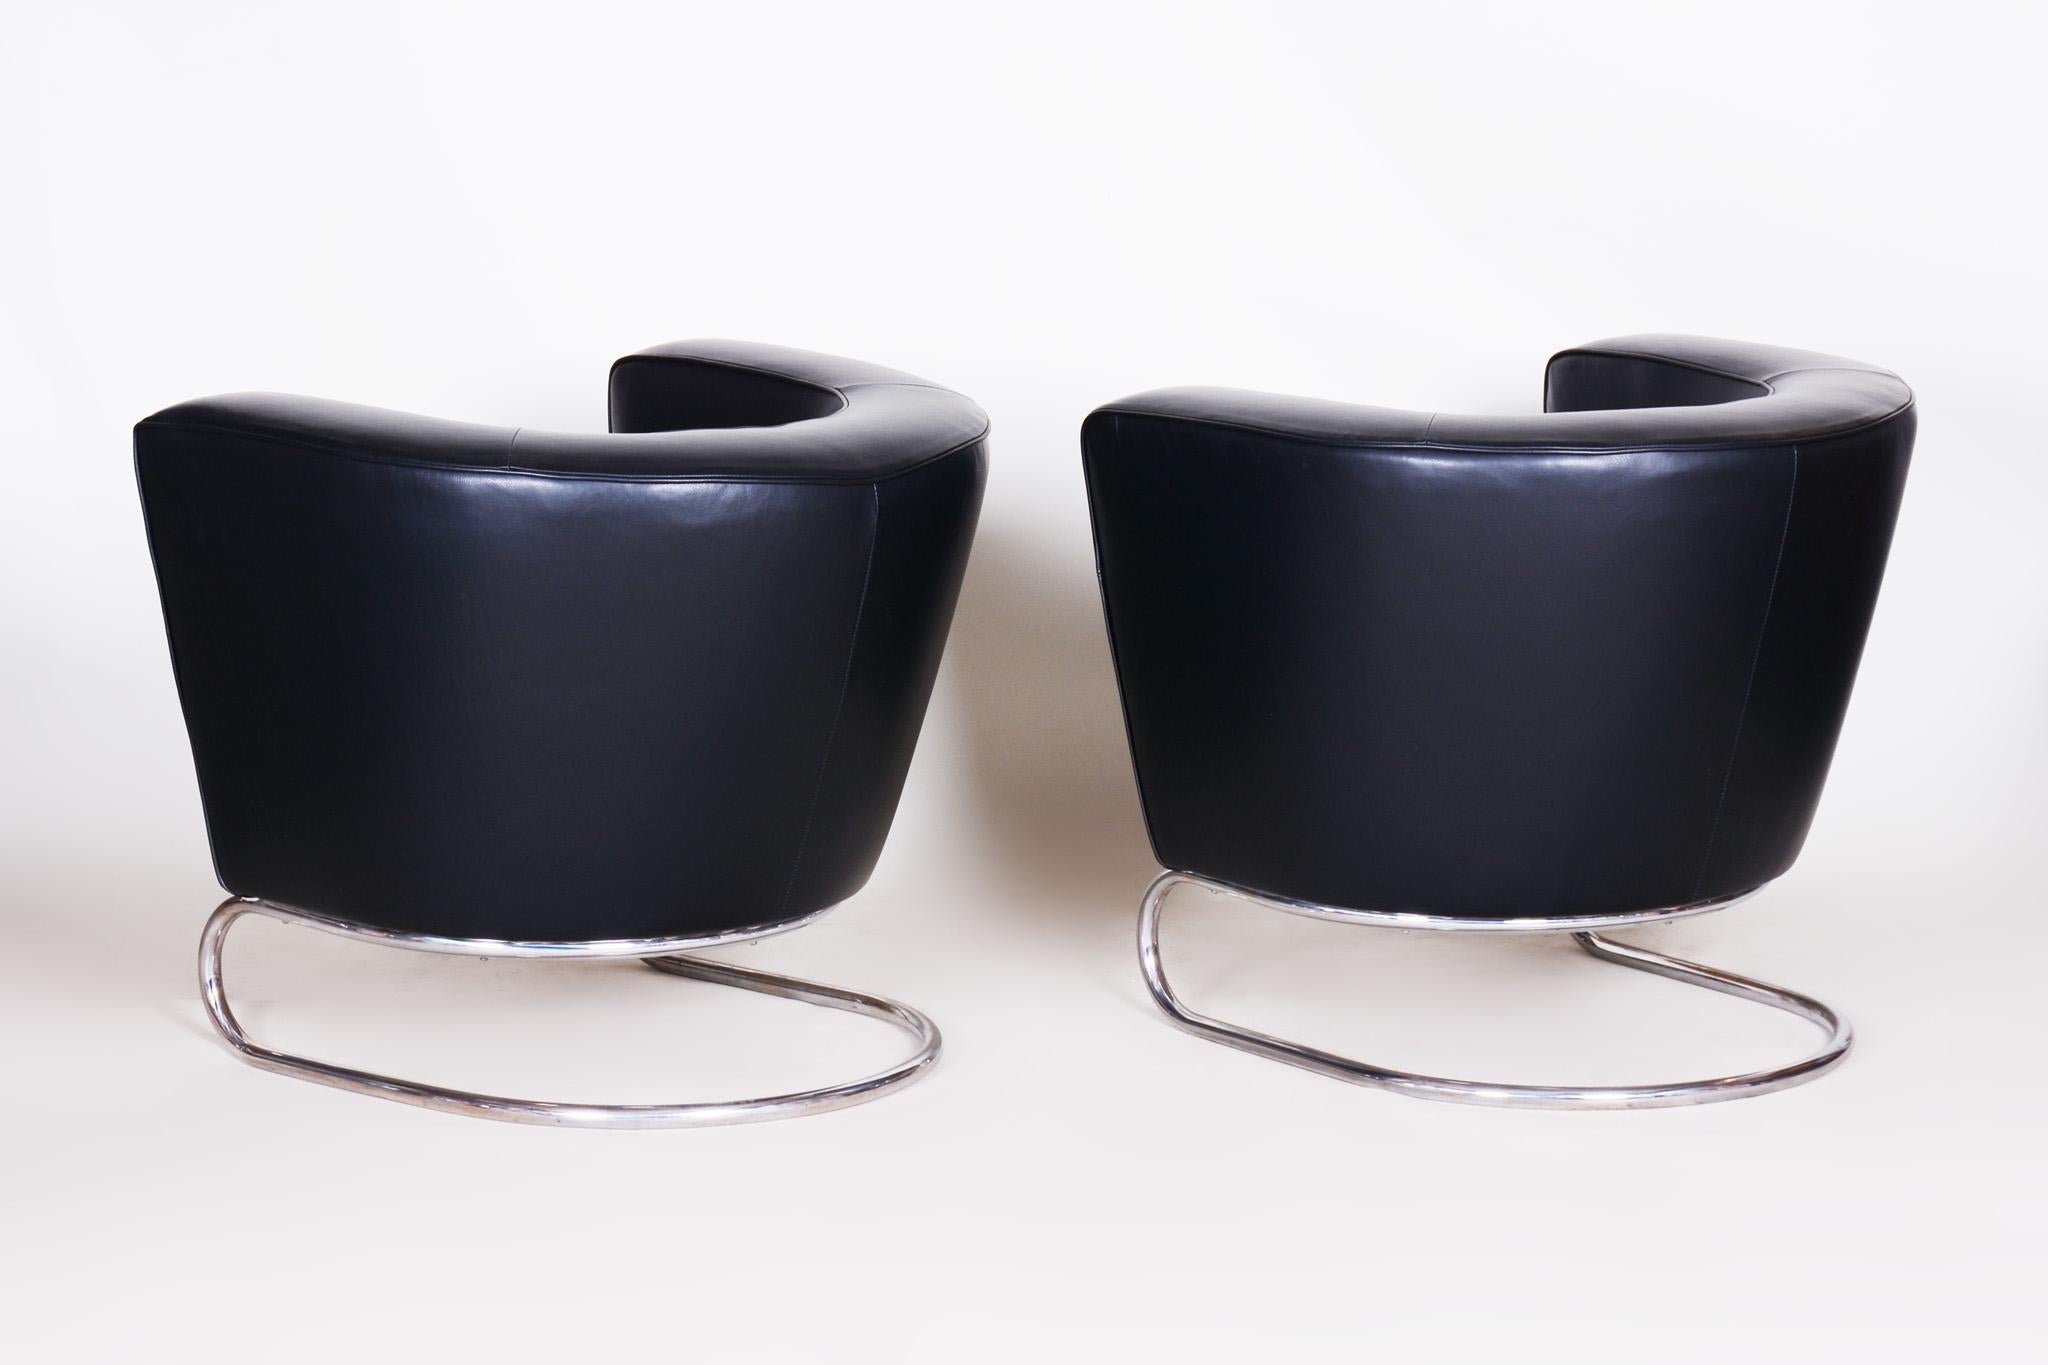 Pair of Black Art Deco Armchairs from Czechoslovakia by Jindrich Halabala, 1930s For Sale 3